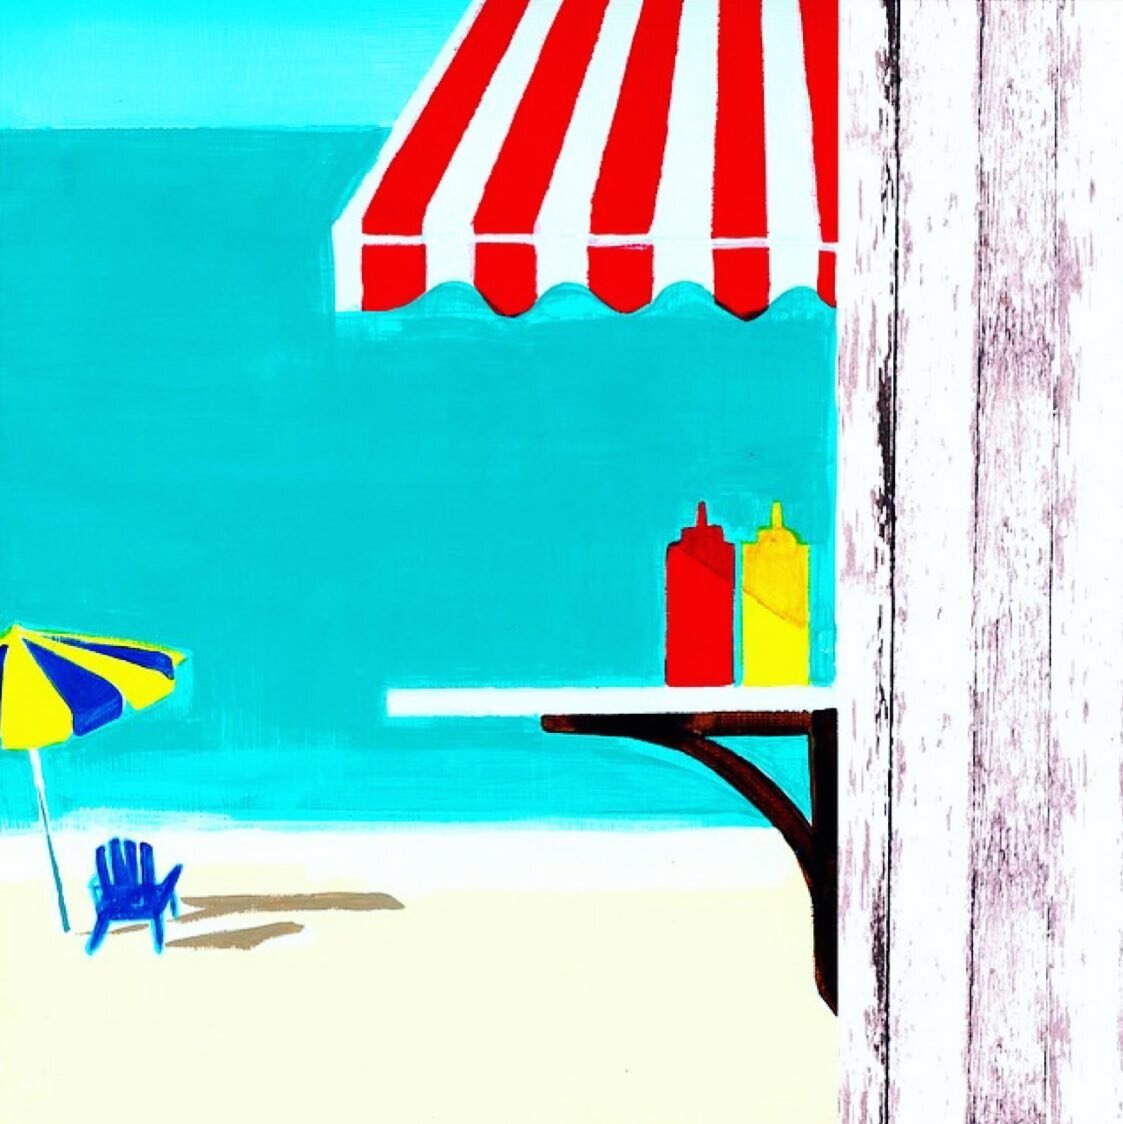 Another piece from 6 years ago that popped up in the archive 😍 we&rsquo;ve always been super inspired by a summer vibe ☀️✨ #popartstyle #beachplease
.
.
.
.
.
.
#beachart #summerart #popart #acrylicpainting #instaart #surfacedesign #wallart #walldec